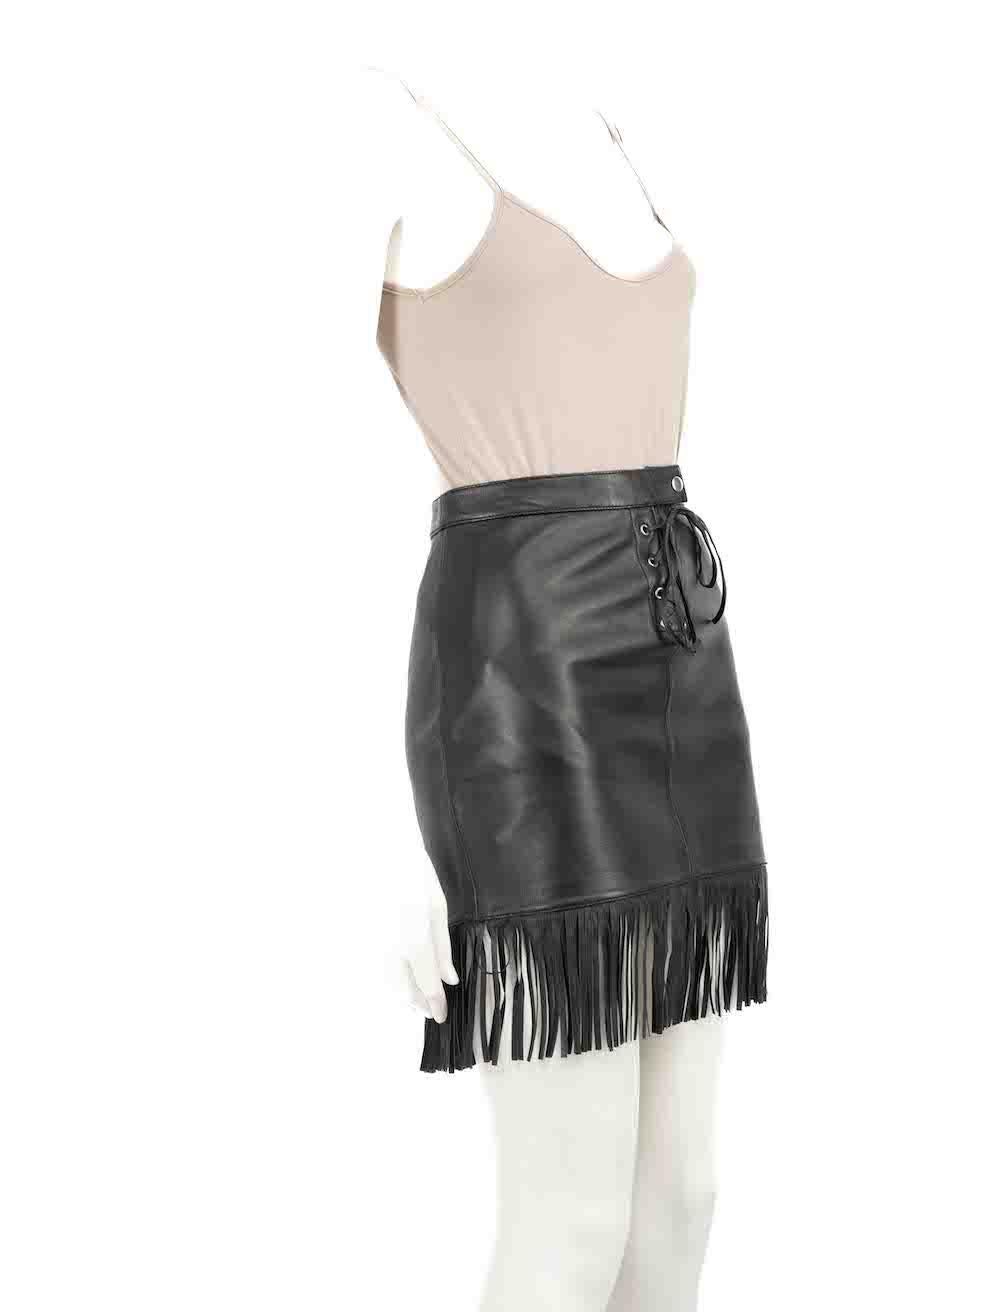 CONDITION is Very good. Minimal wear to skirt is evident. Minimal wear to the front fastening edge, with abrasion to the corner. The faux leather lace up front has begun to split on this used Maje designer resale item.
 
 
 
 Details
 
 
 Black
 
